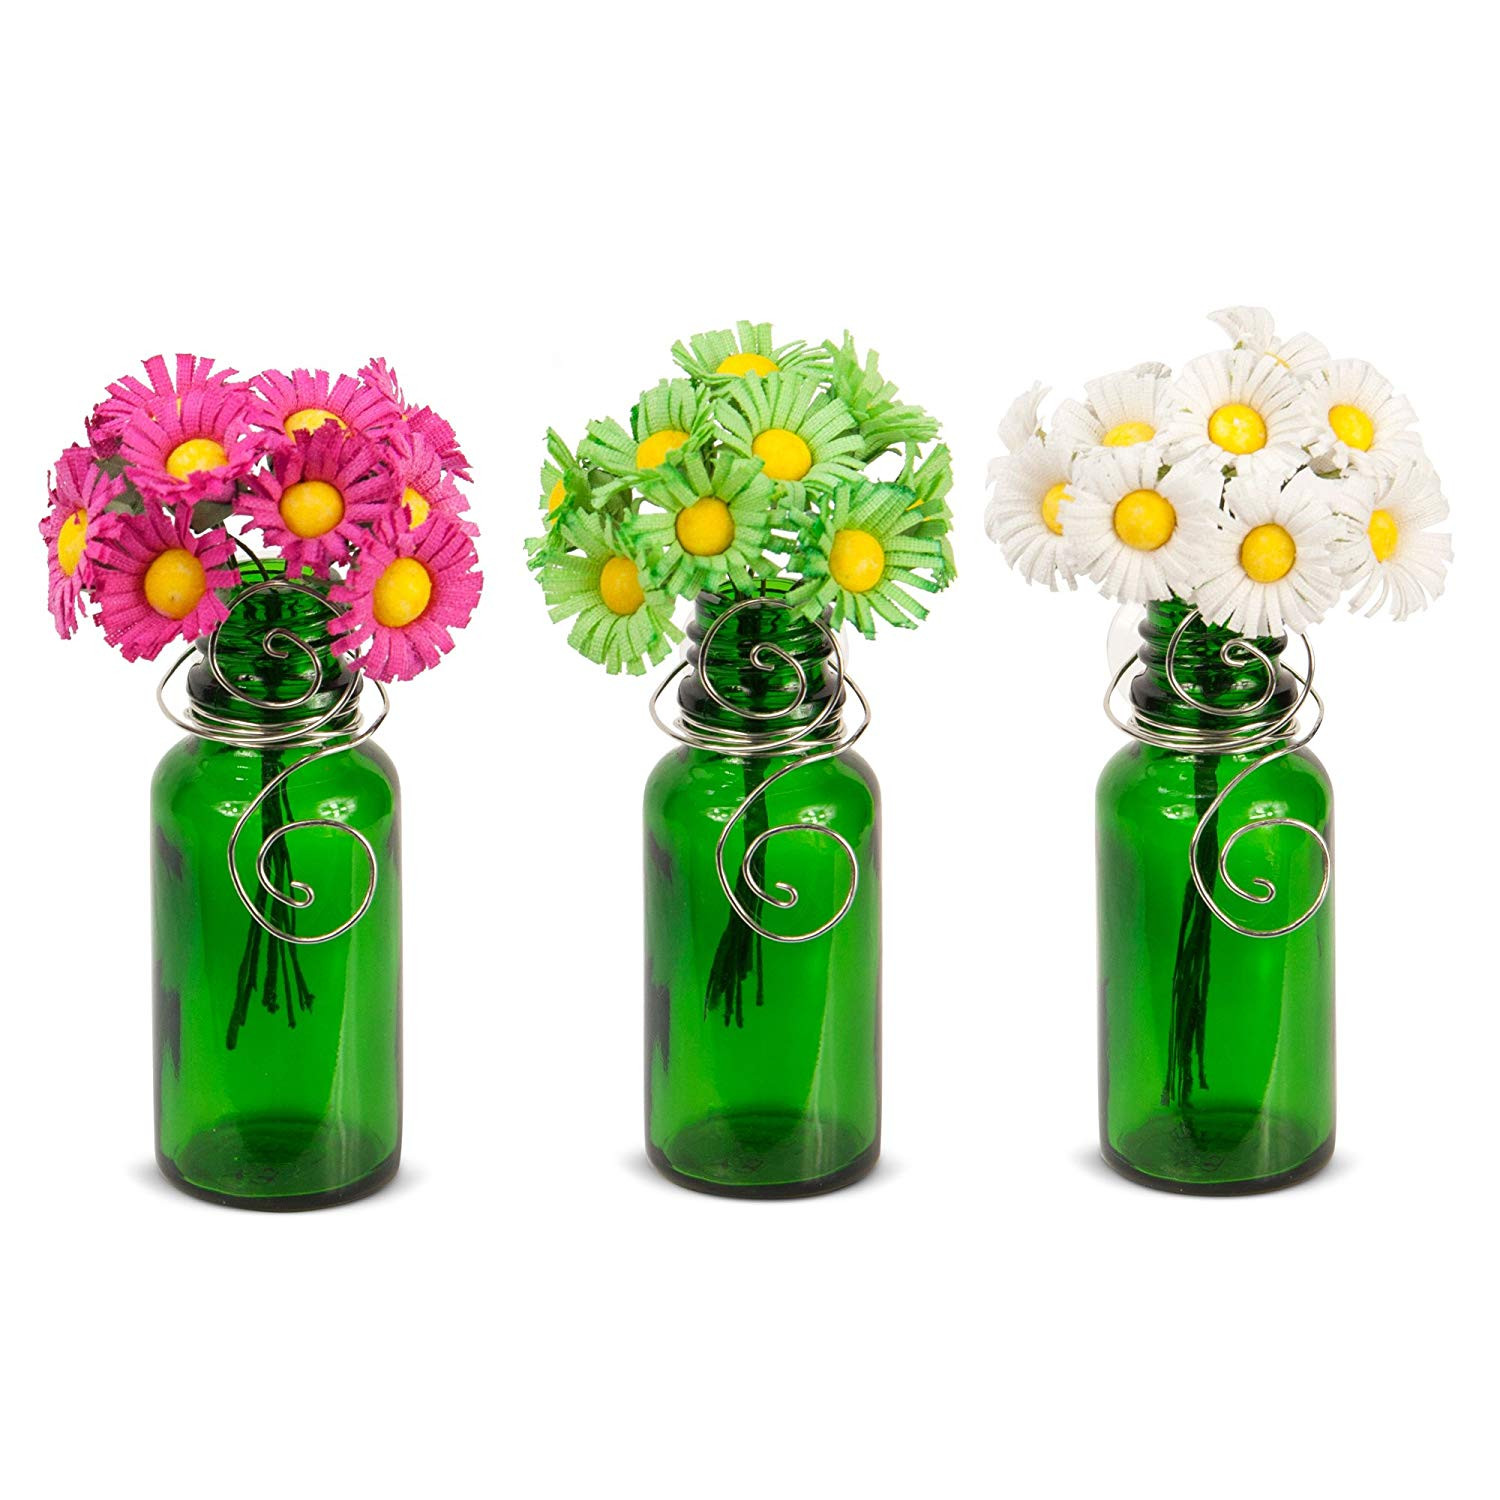 18 Cute Small Flower Vase Online 2024 free download small flower vase online of amazon com vazzini mini vase bouquet suction cup bud bottle intended for amazon com vazzini mini vase bouquet suction cup bud bottle holder with flowers decorativ